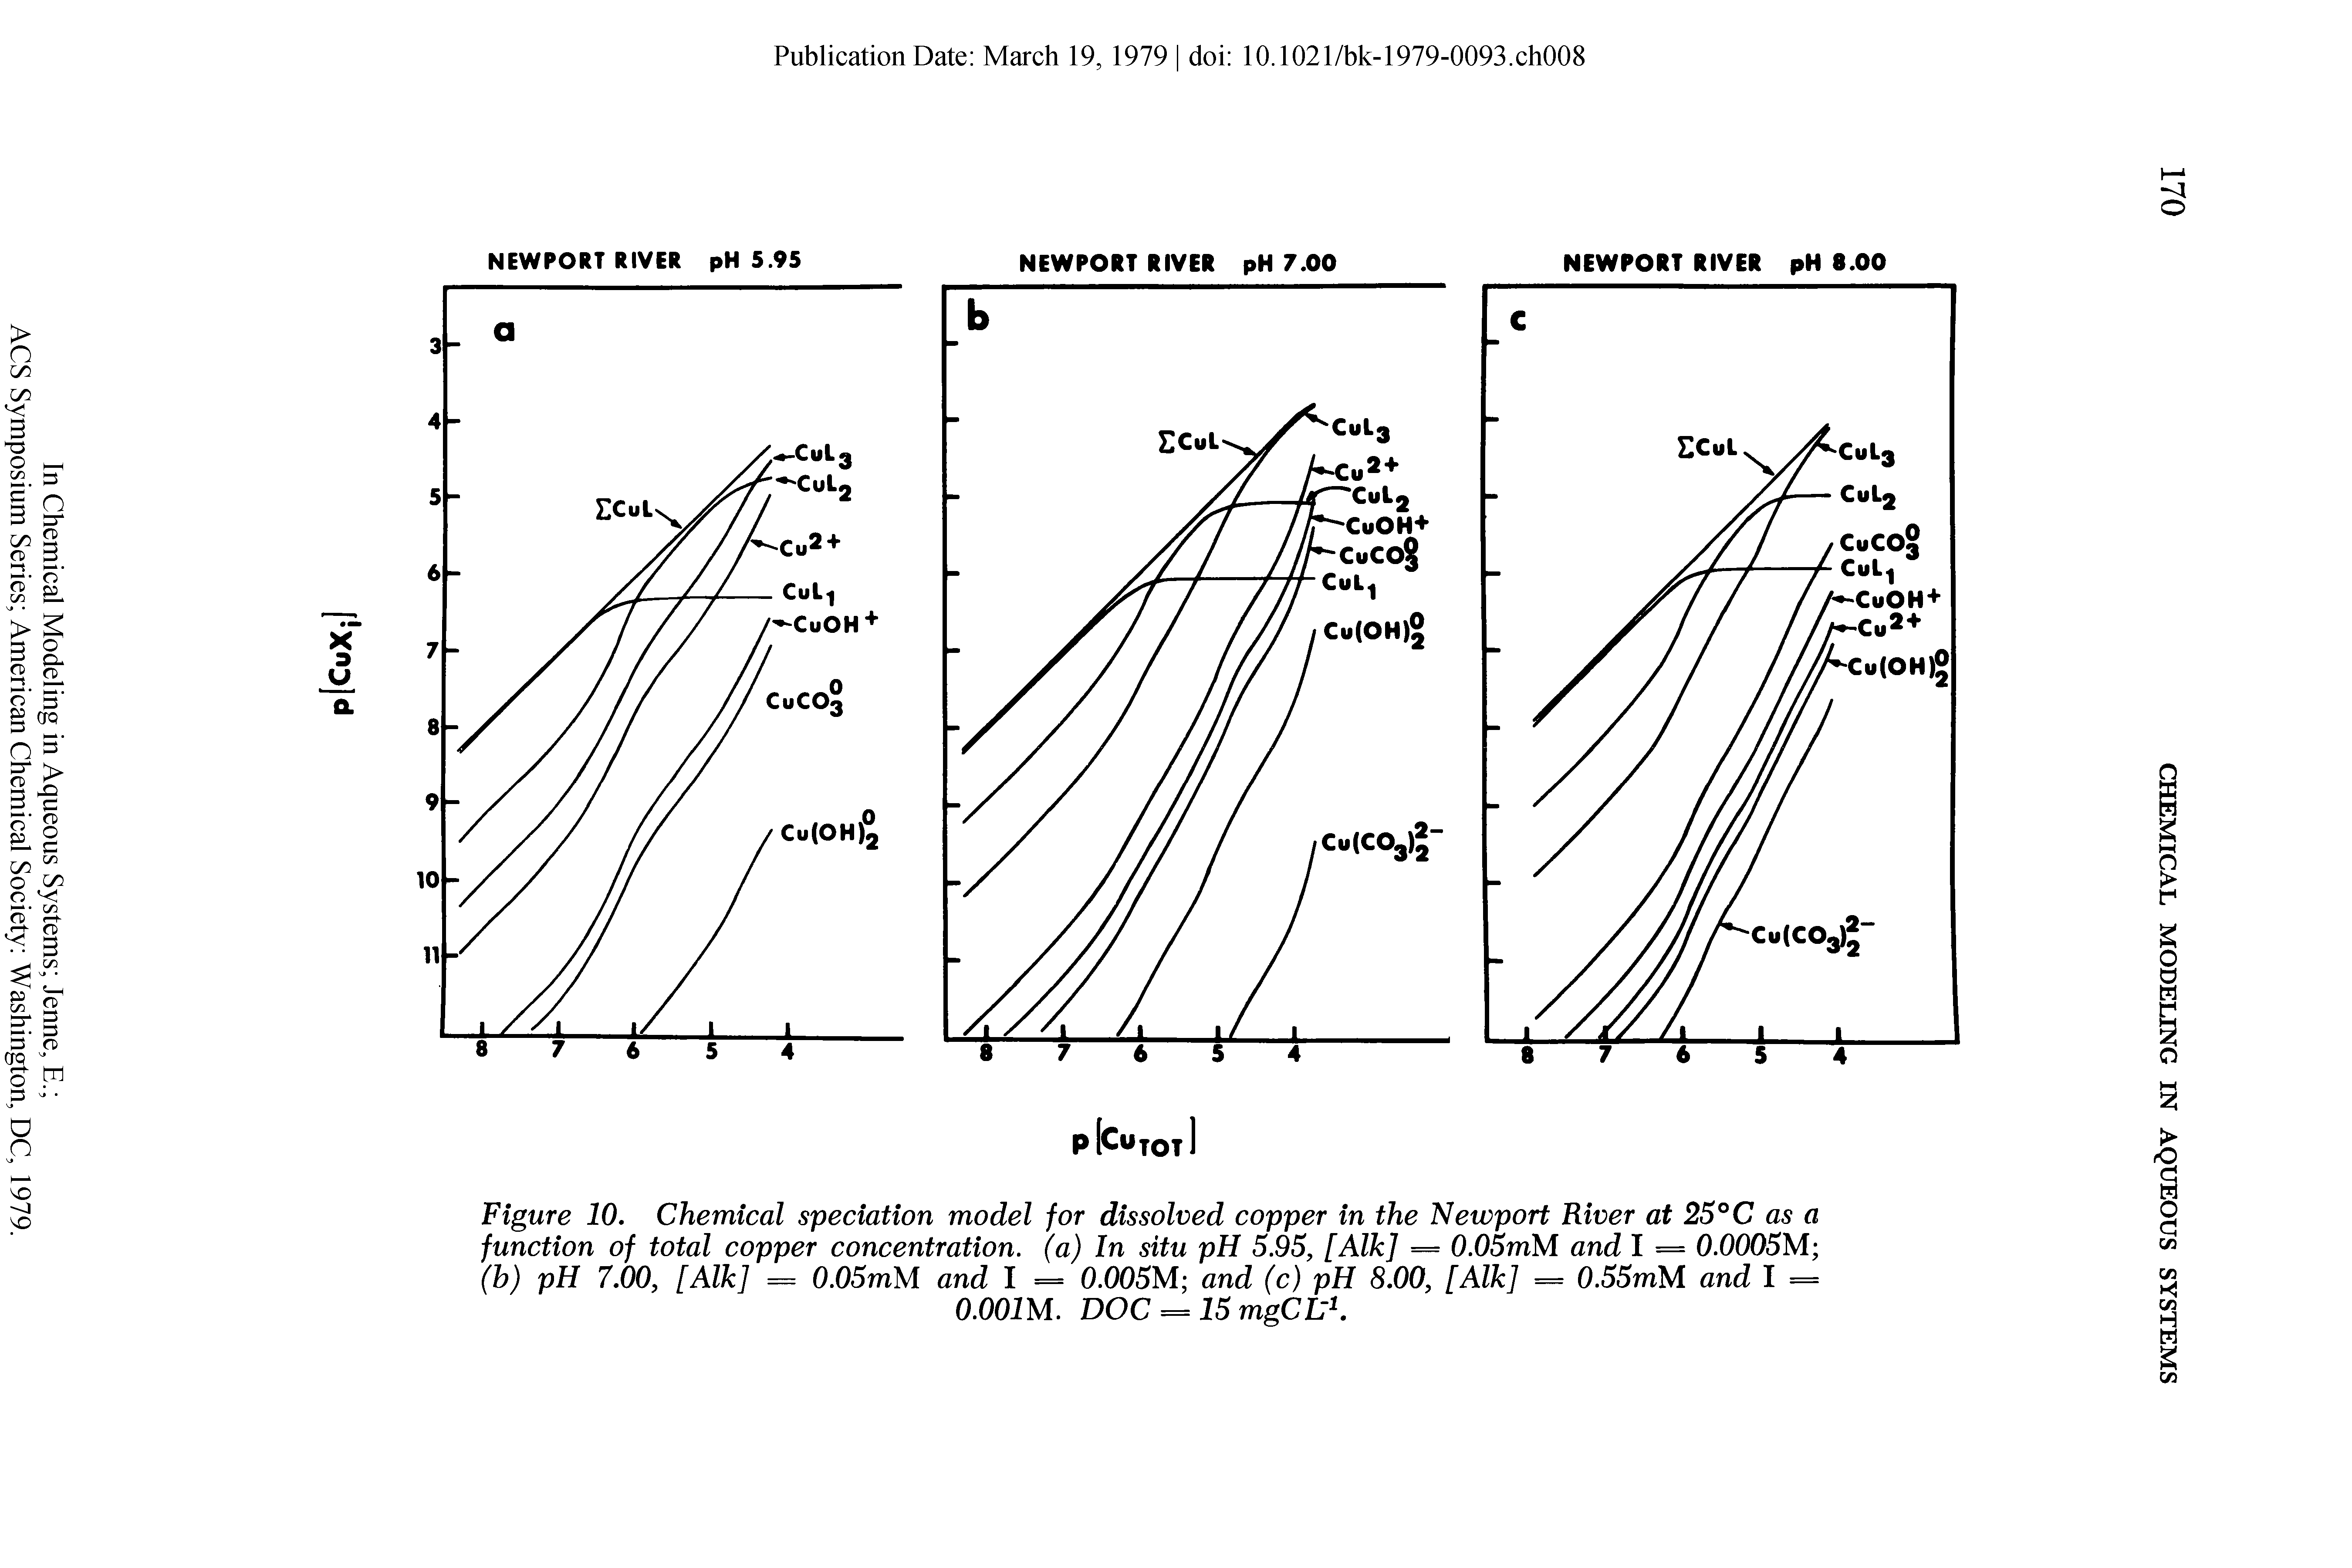 Figure 10. Chemical speciation model for dissolved copper in the Newport River at 25°C as a function of total copper concentration, (a) In situ pH 5.95, [Aik] = 0.05mM and I = 0.0005M (b) pH 7.00, [Aik] = 0.05mU and I = 0.005M and (c) pH 8.00, [Aik] = 0.55mM and I =...